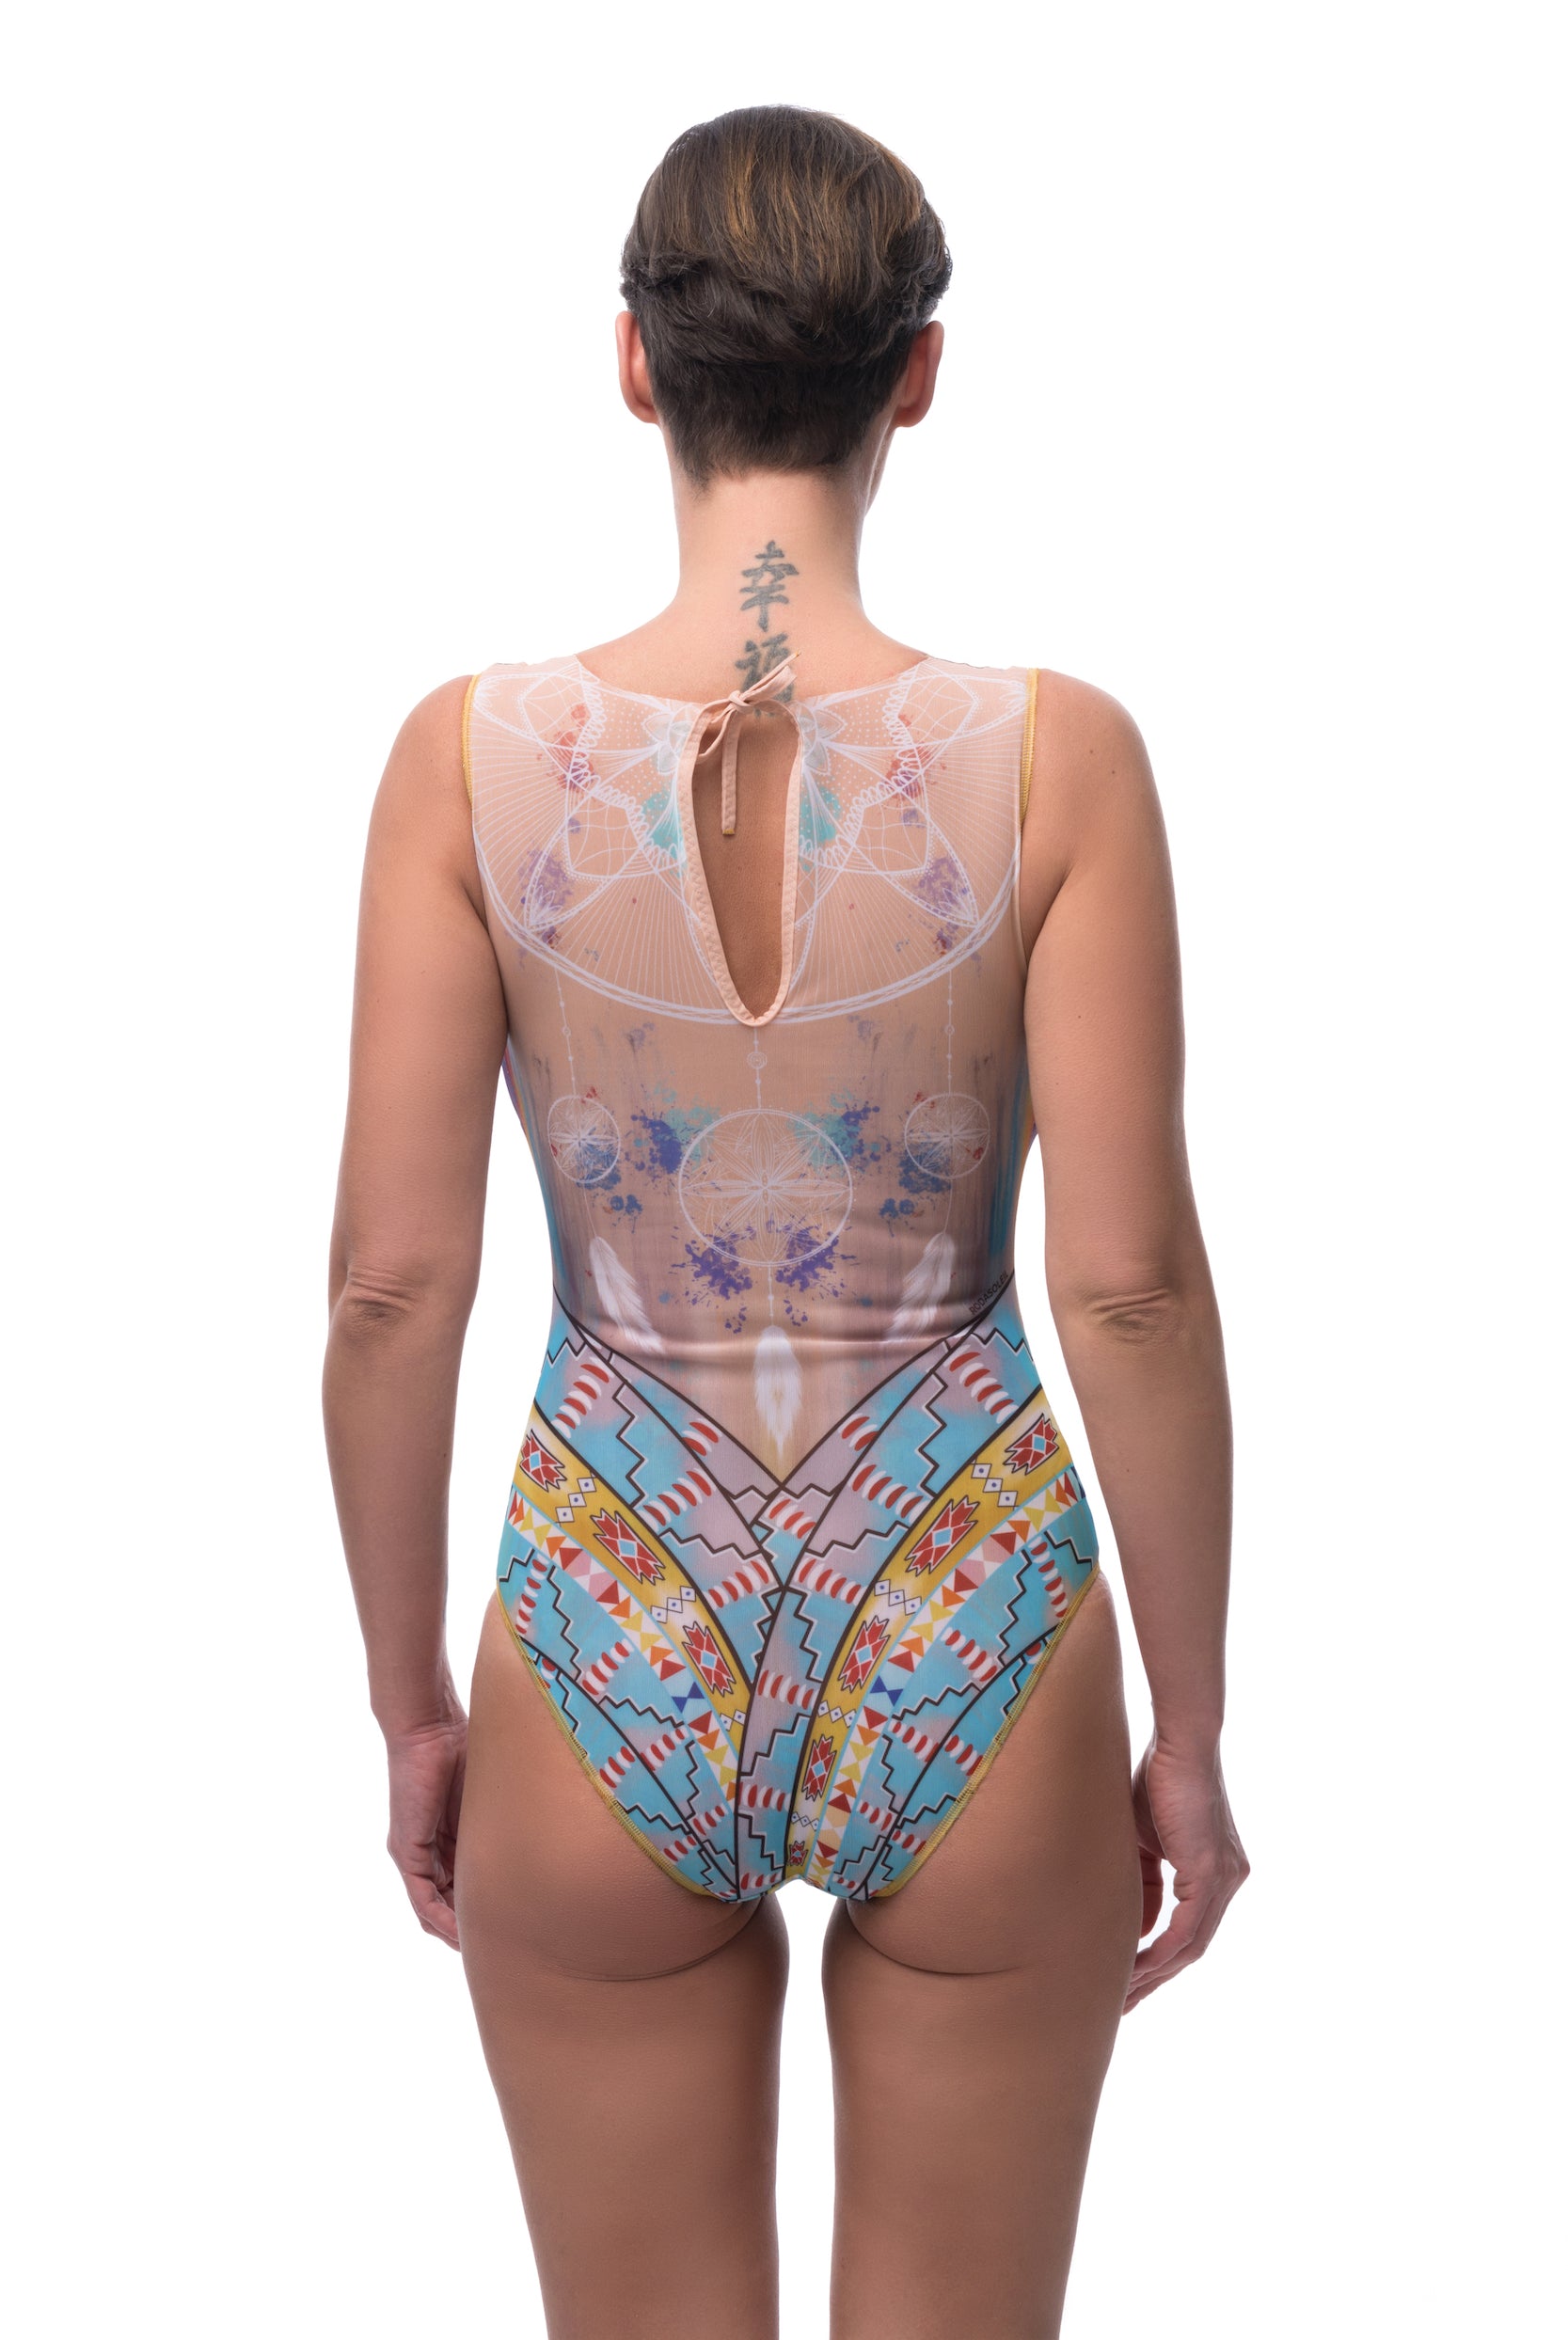 This file introduces a collection of luxury smart swimsuits featuring the iconic dreamcatcher print. With tan-through fabric and SPF 35 protection, these sleeveless one-pieces offer sophistication and style for summer